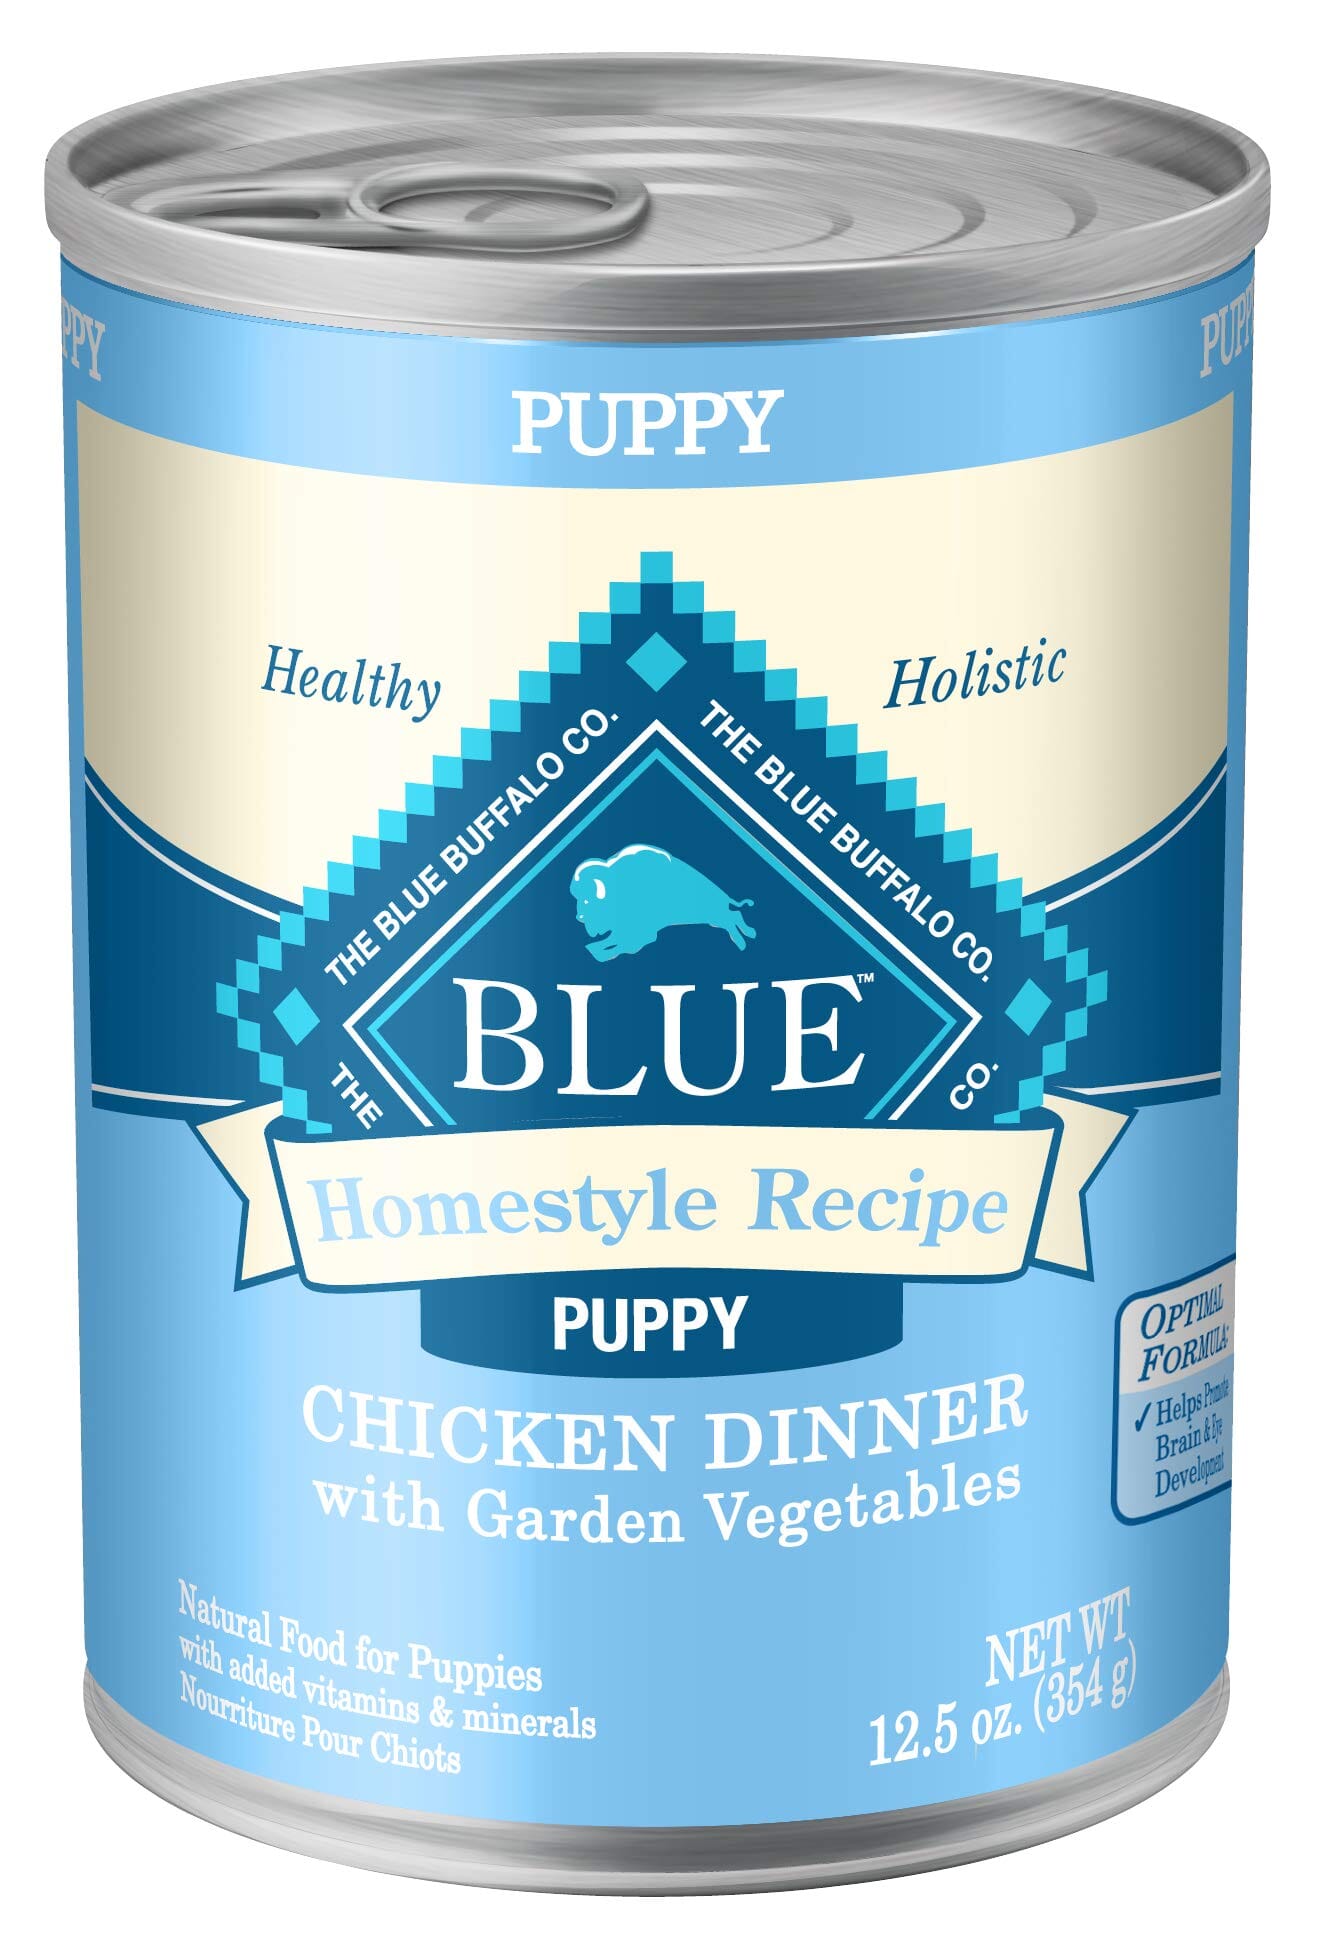 Blue Buffalo Homestyle Recipe Chicken Natural Puppy Canned Dog Food - 12.5 Oz - Case of 12  